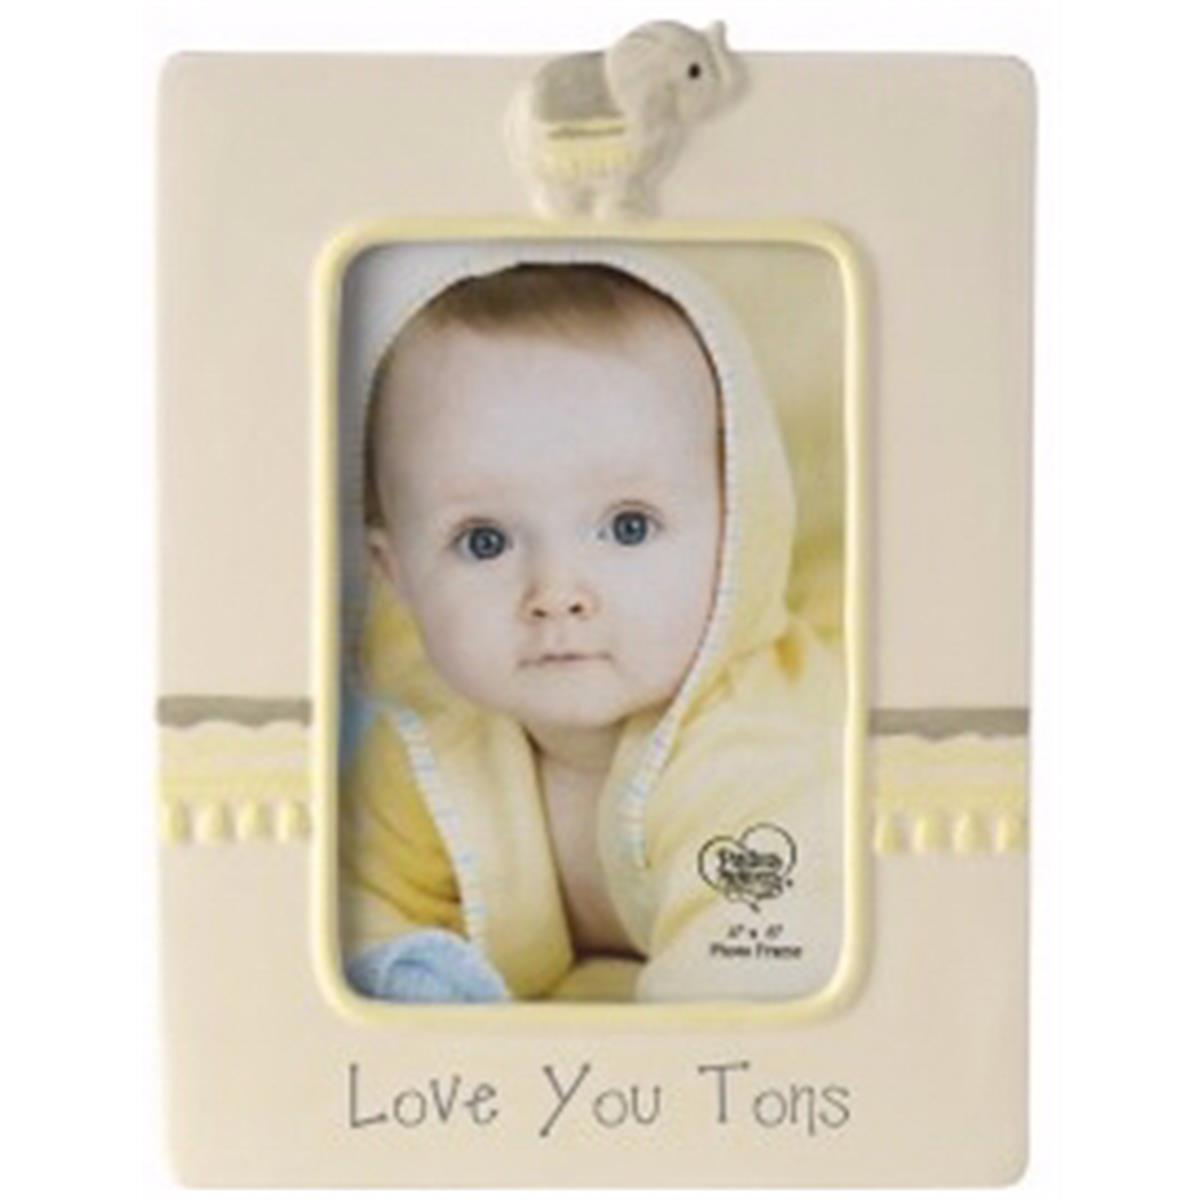 164082 Love You Tons & Elephant Photo Frame - Holds 4 X 6 In. Photo